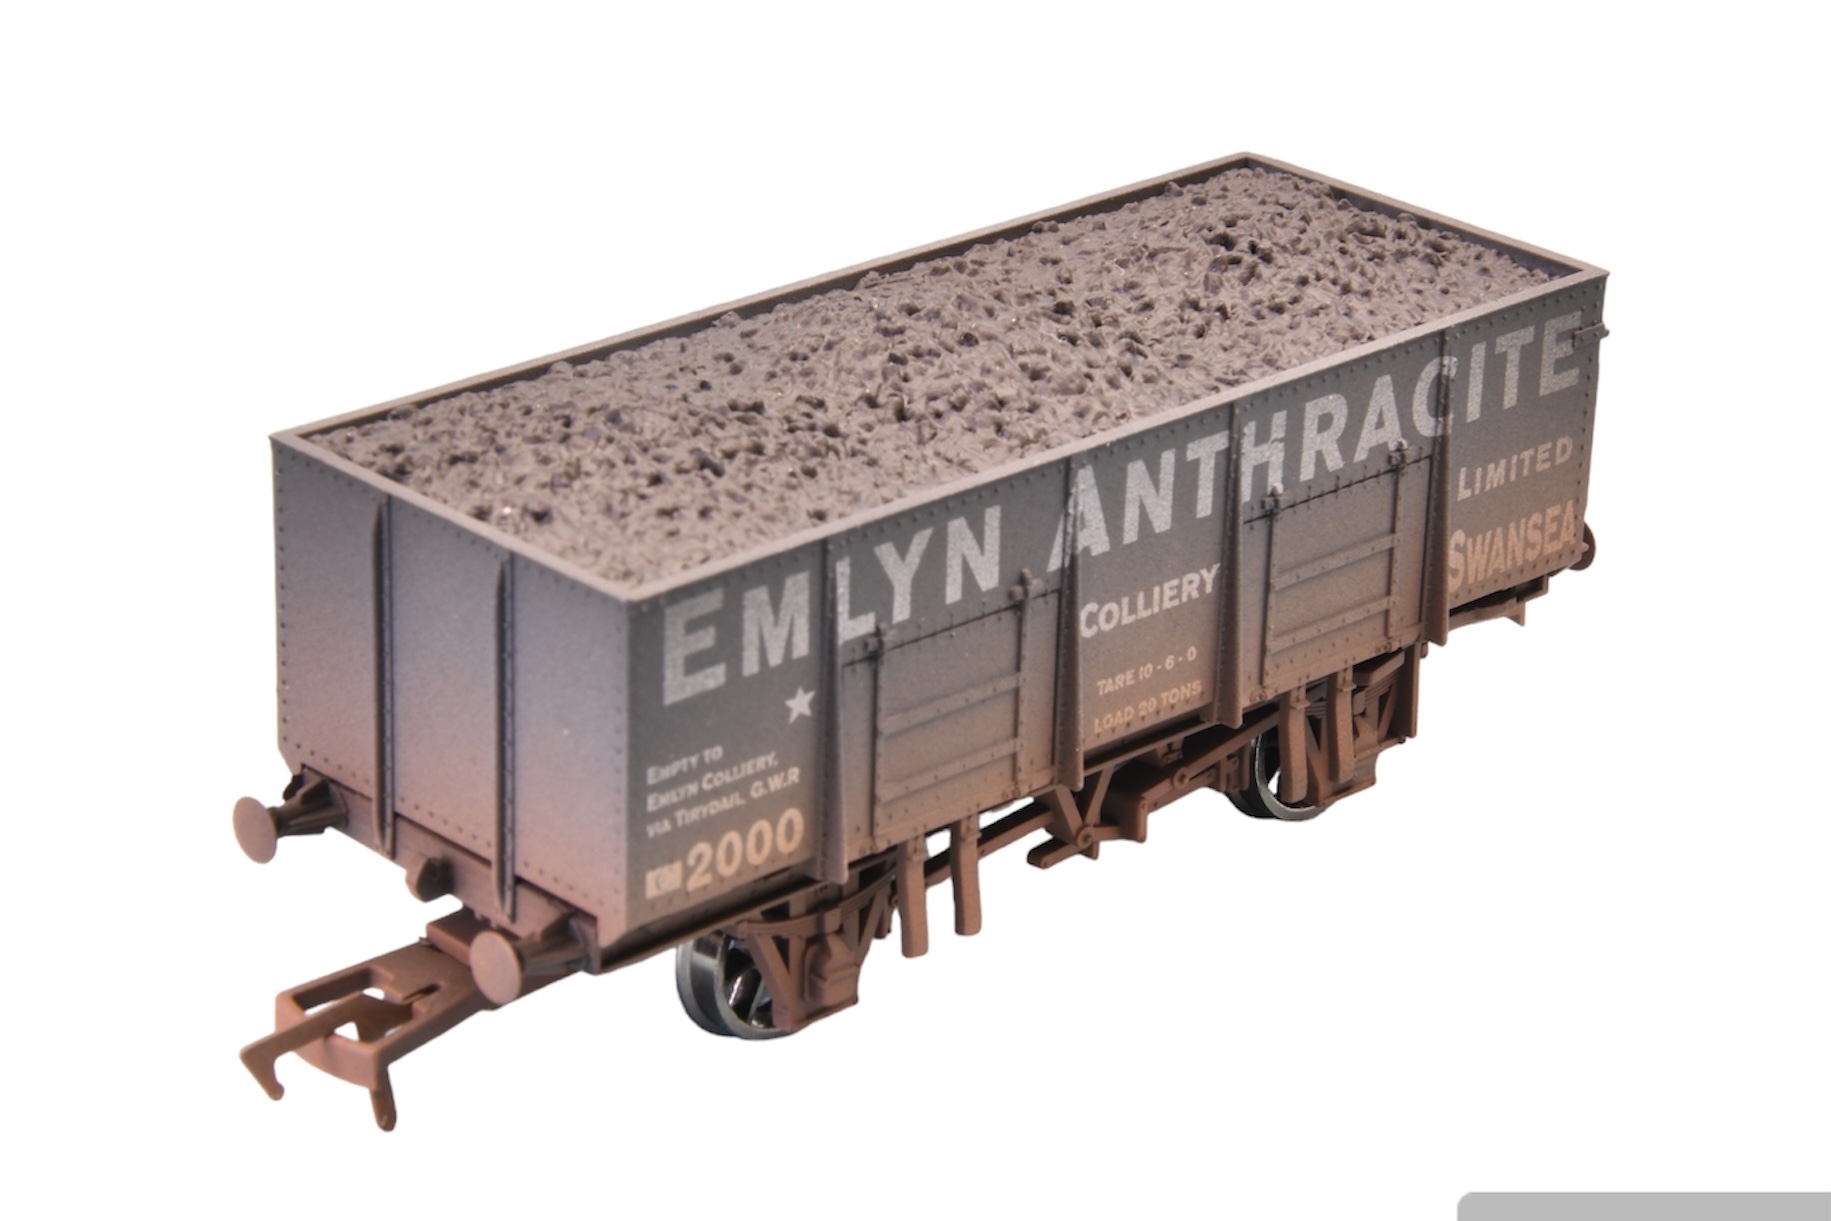 4F-038-002 20T STEEL MINERAL EMLYN ANTHRACITE WEATHERED